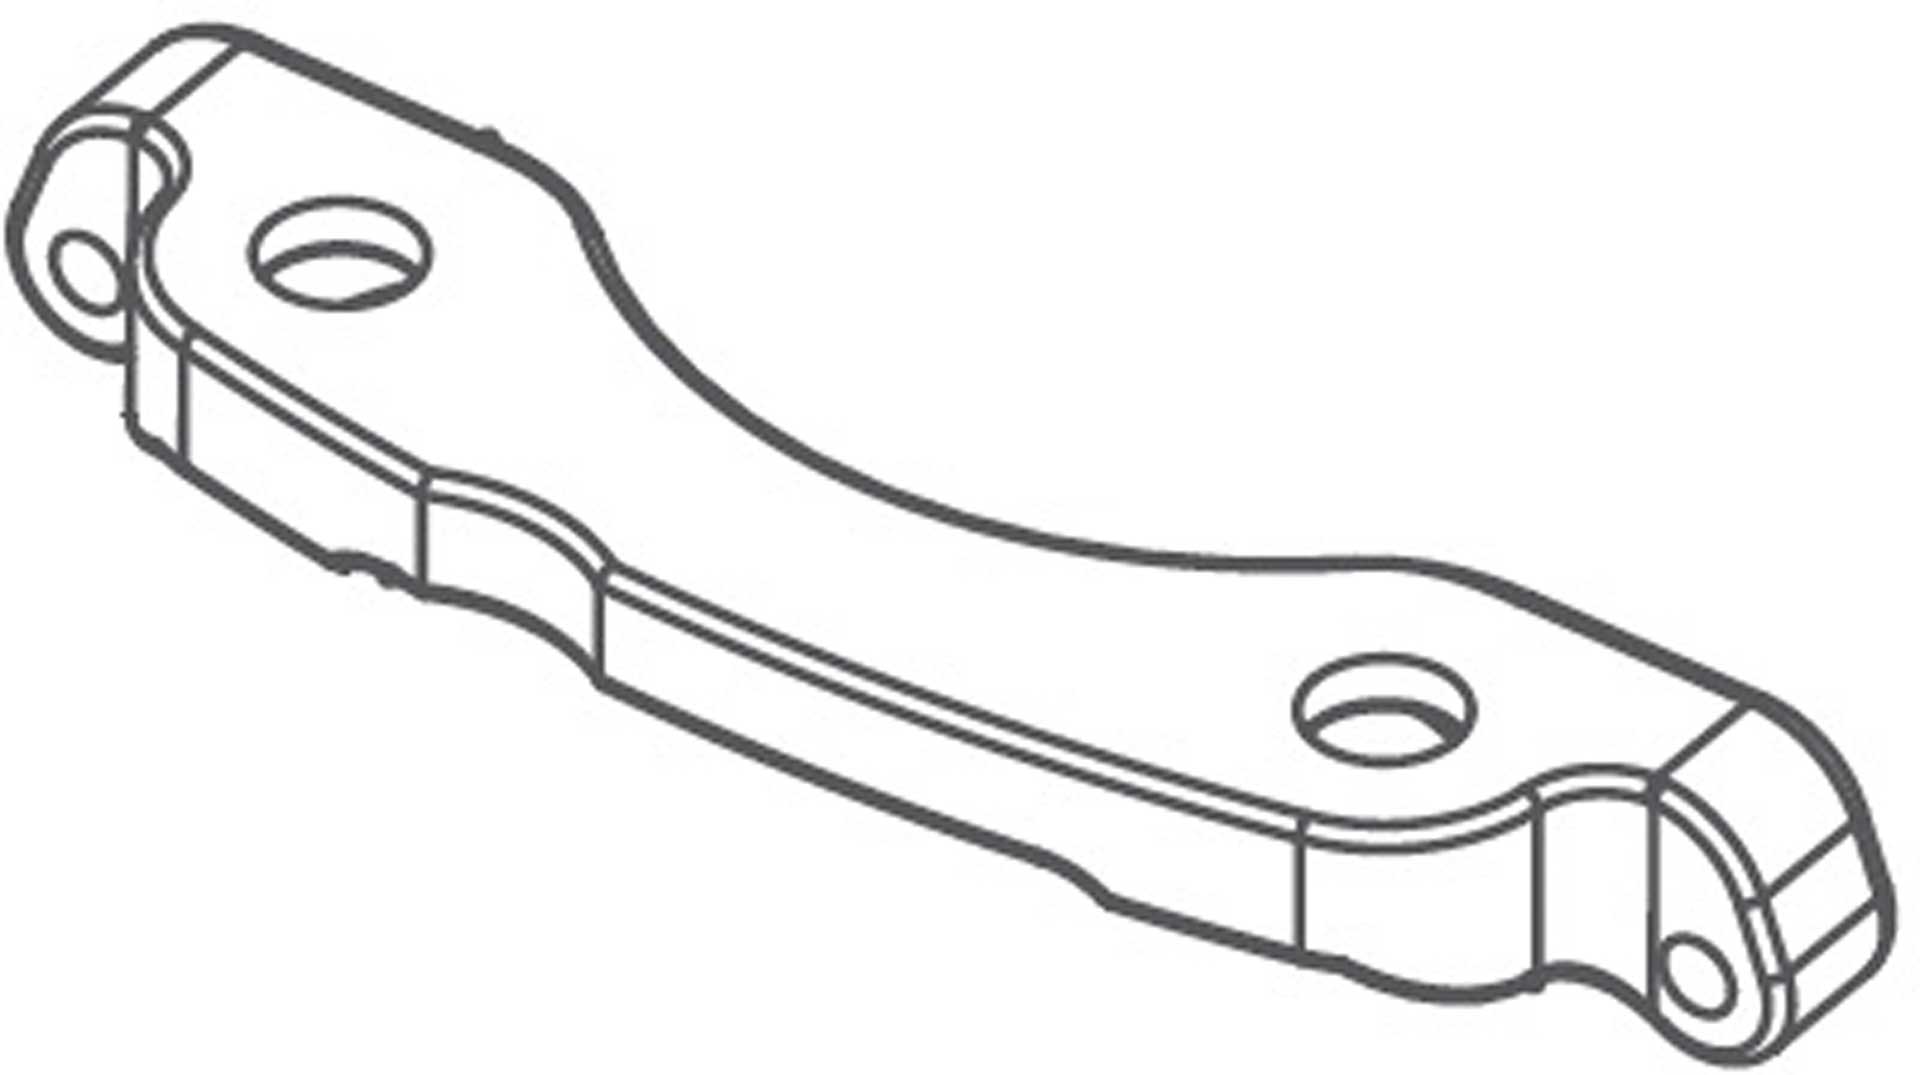 ABSIMA Steering Connecting Plate